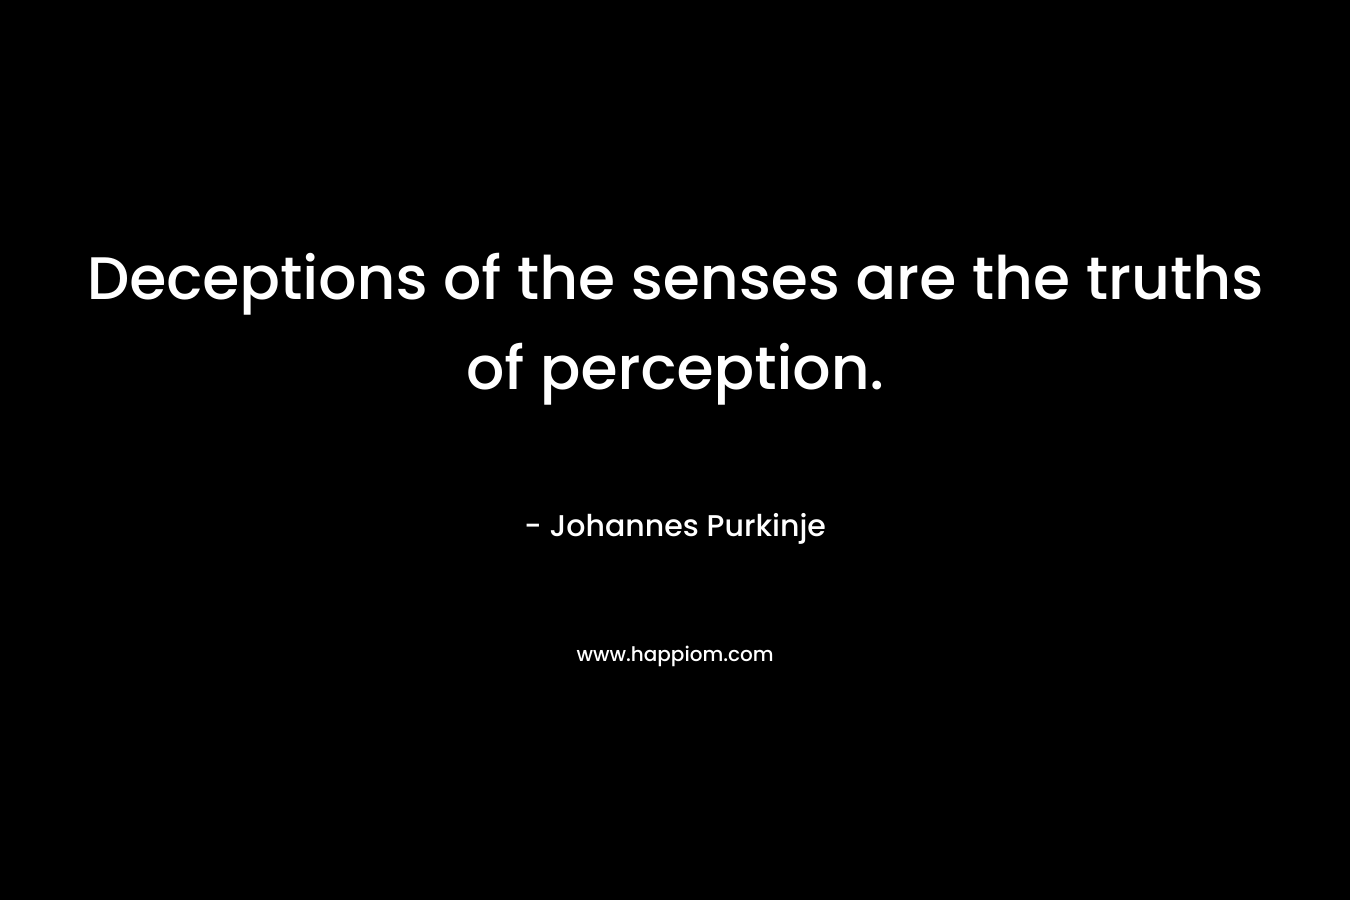 Deceptions of the senses are the truths of perception.